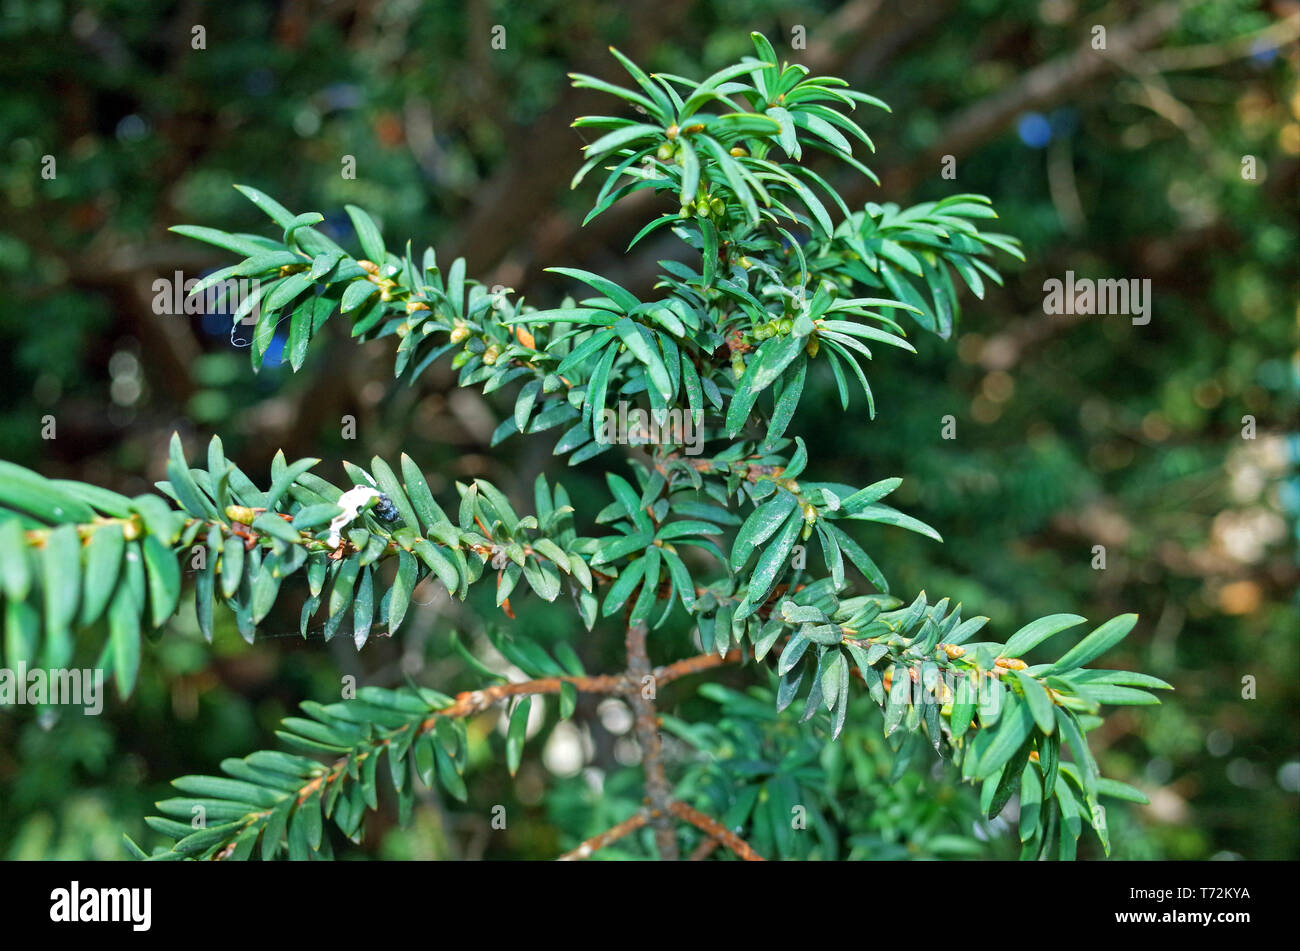 Yew (taxus baccata) close-up Stock Photo